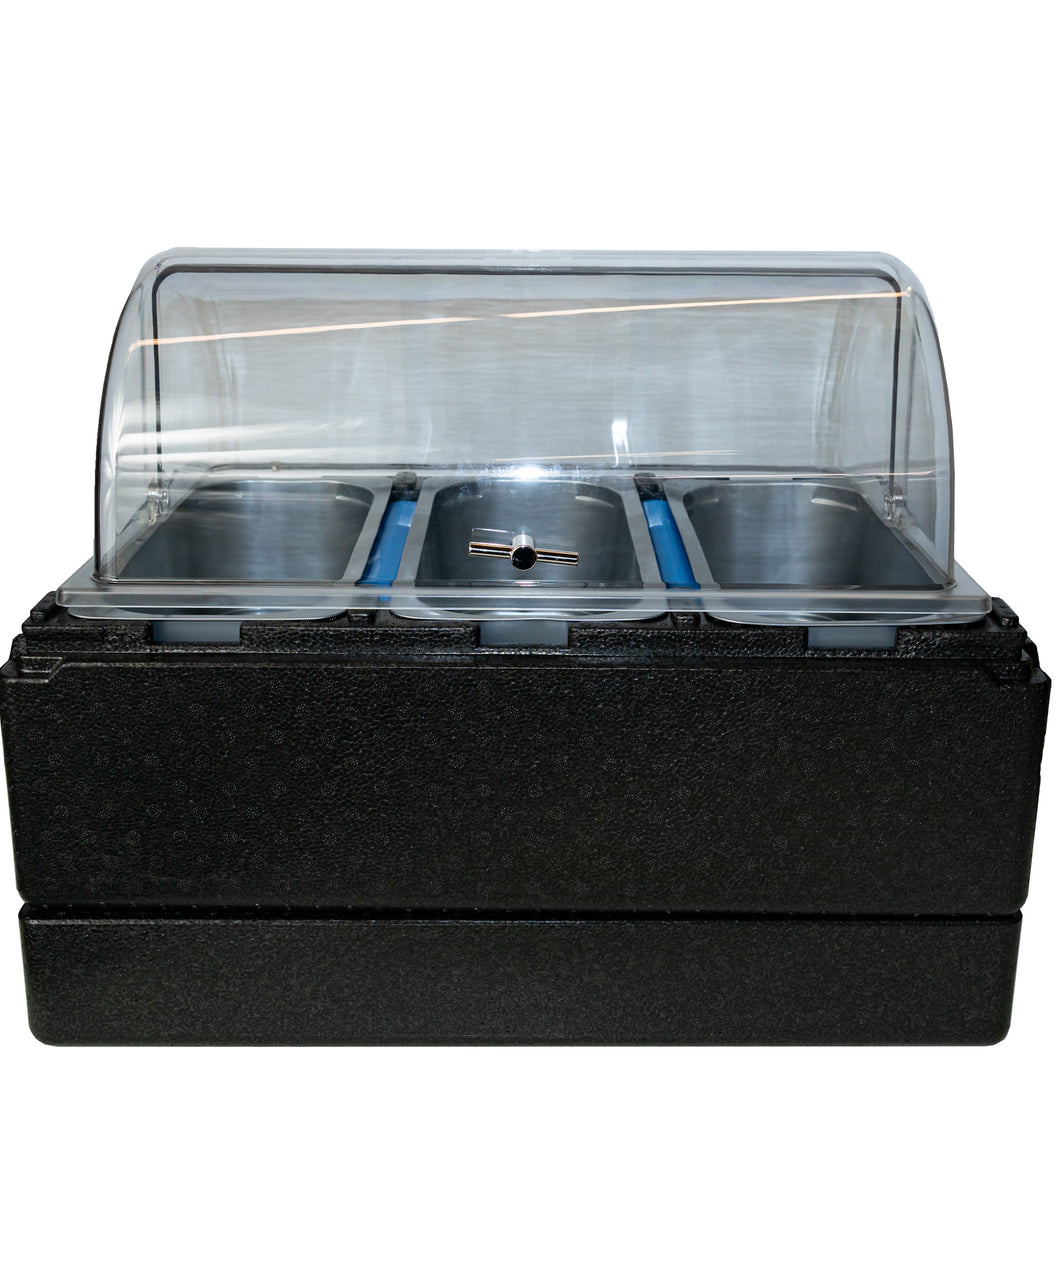 FB Gelato Carrier/Cooler (3-5 L Pans) (Comes w/ 2 FB Plate) + Rolling Cover 23.5